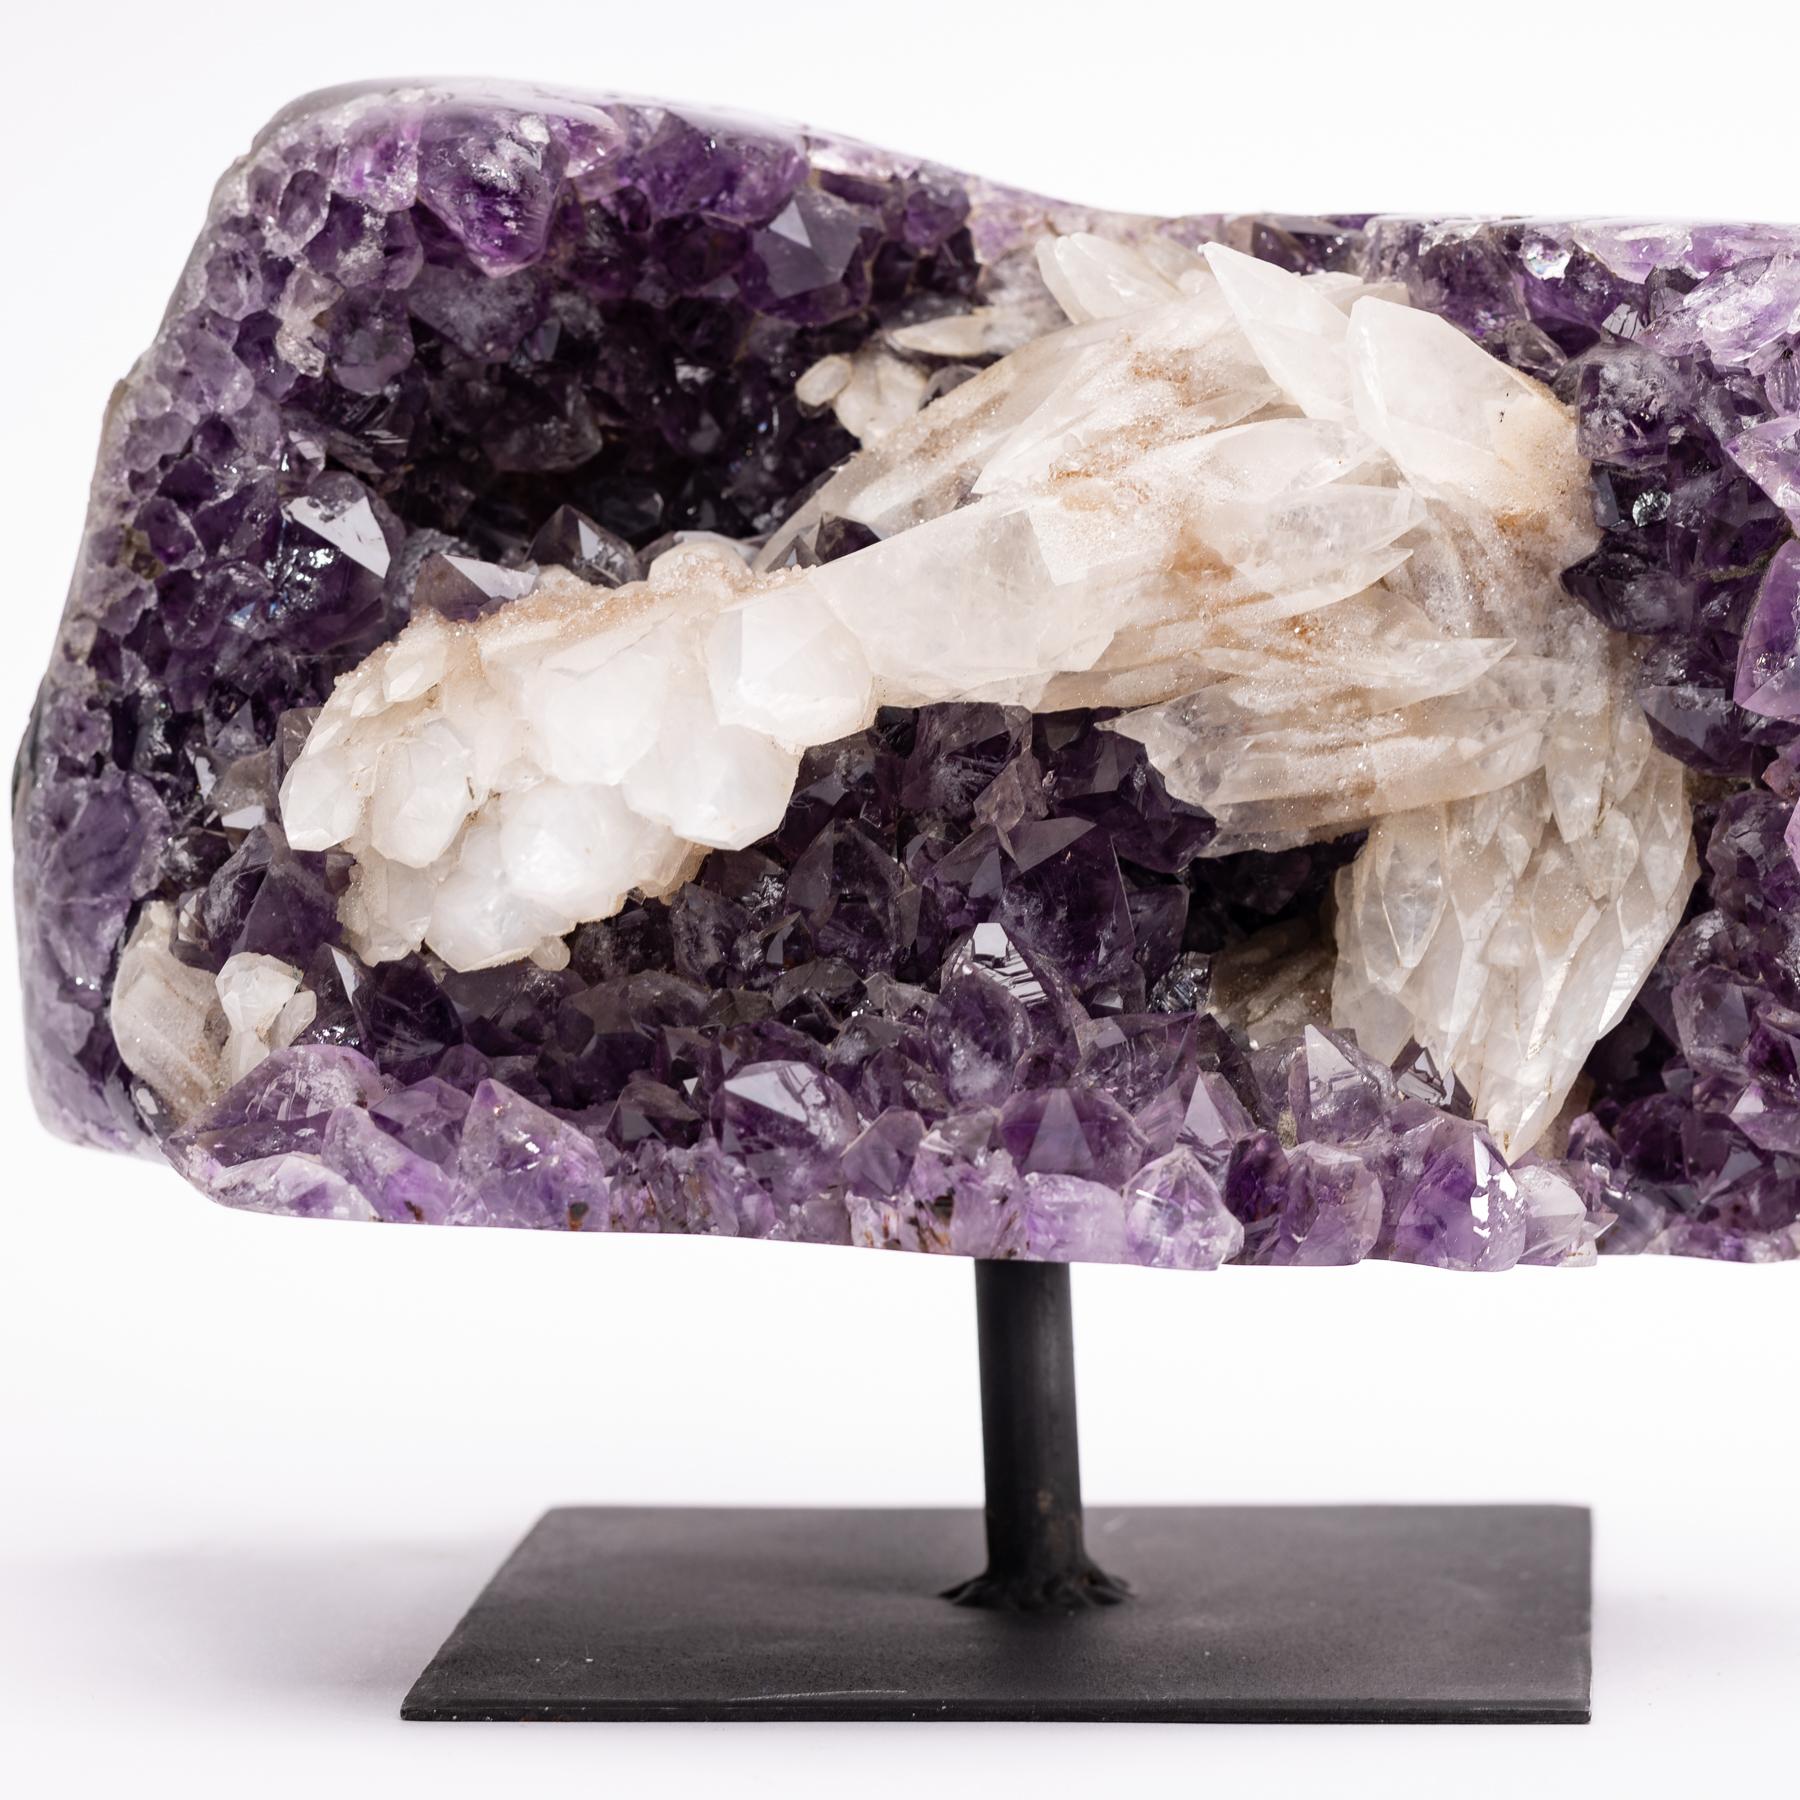 Organic Modern Amethyst Druse and Calcite Specimen Mounted on a Custom Metal Stand